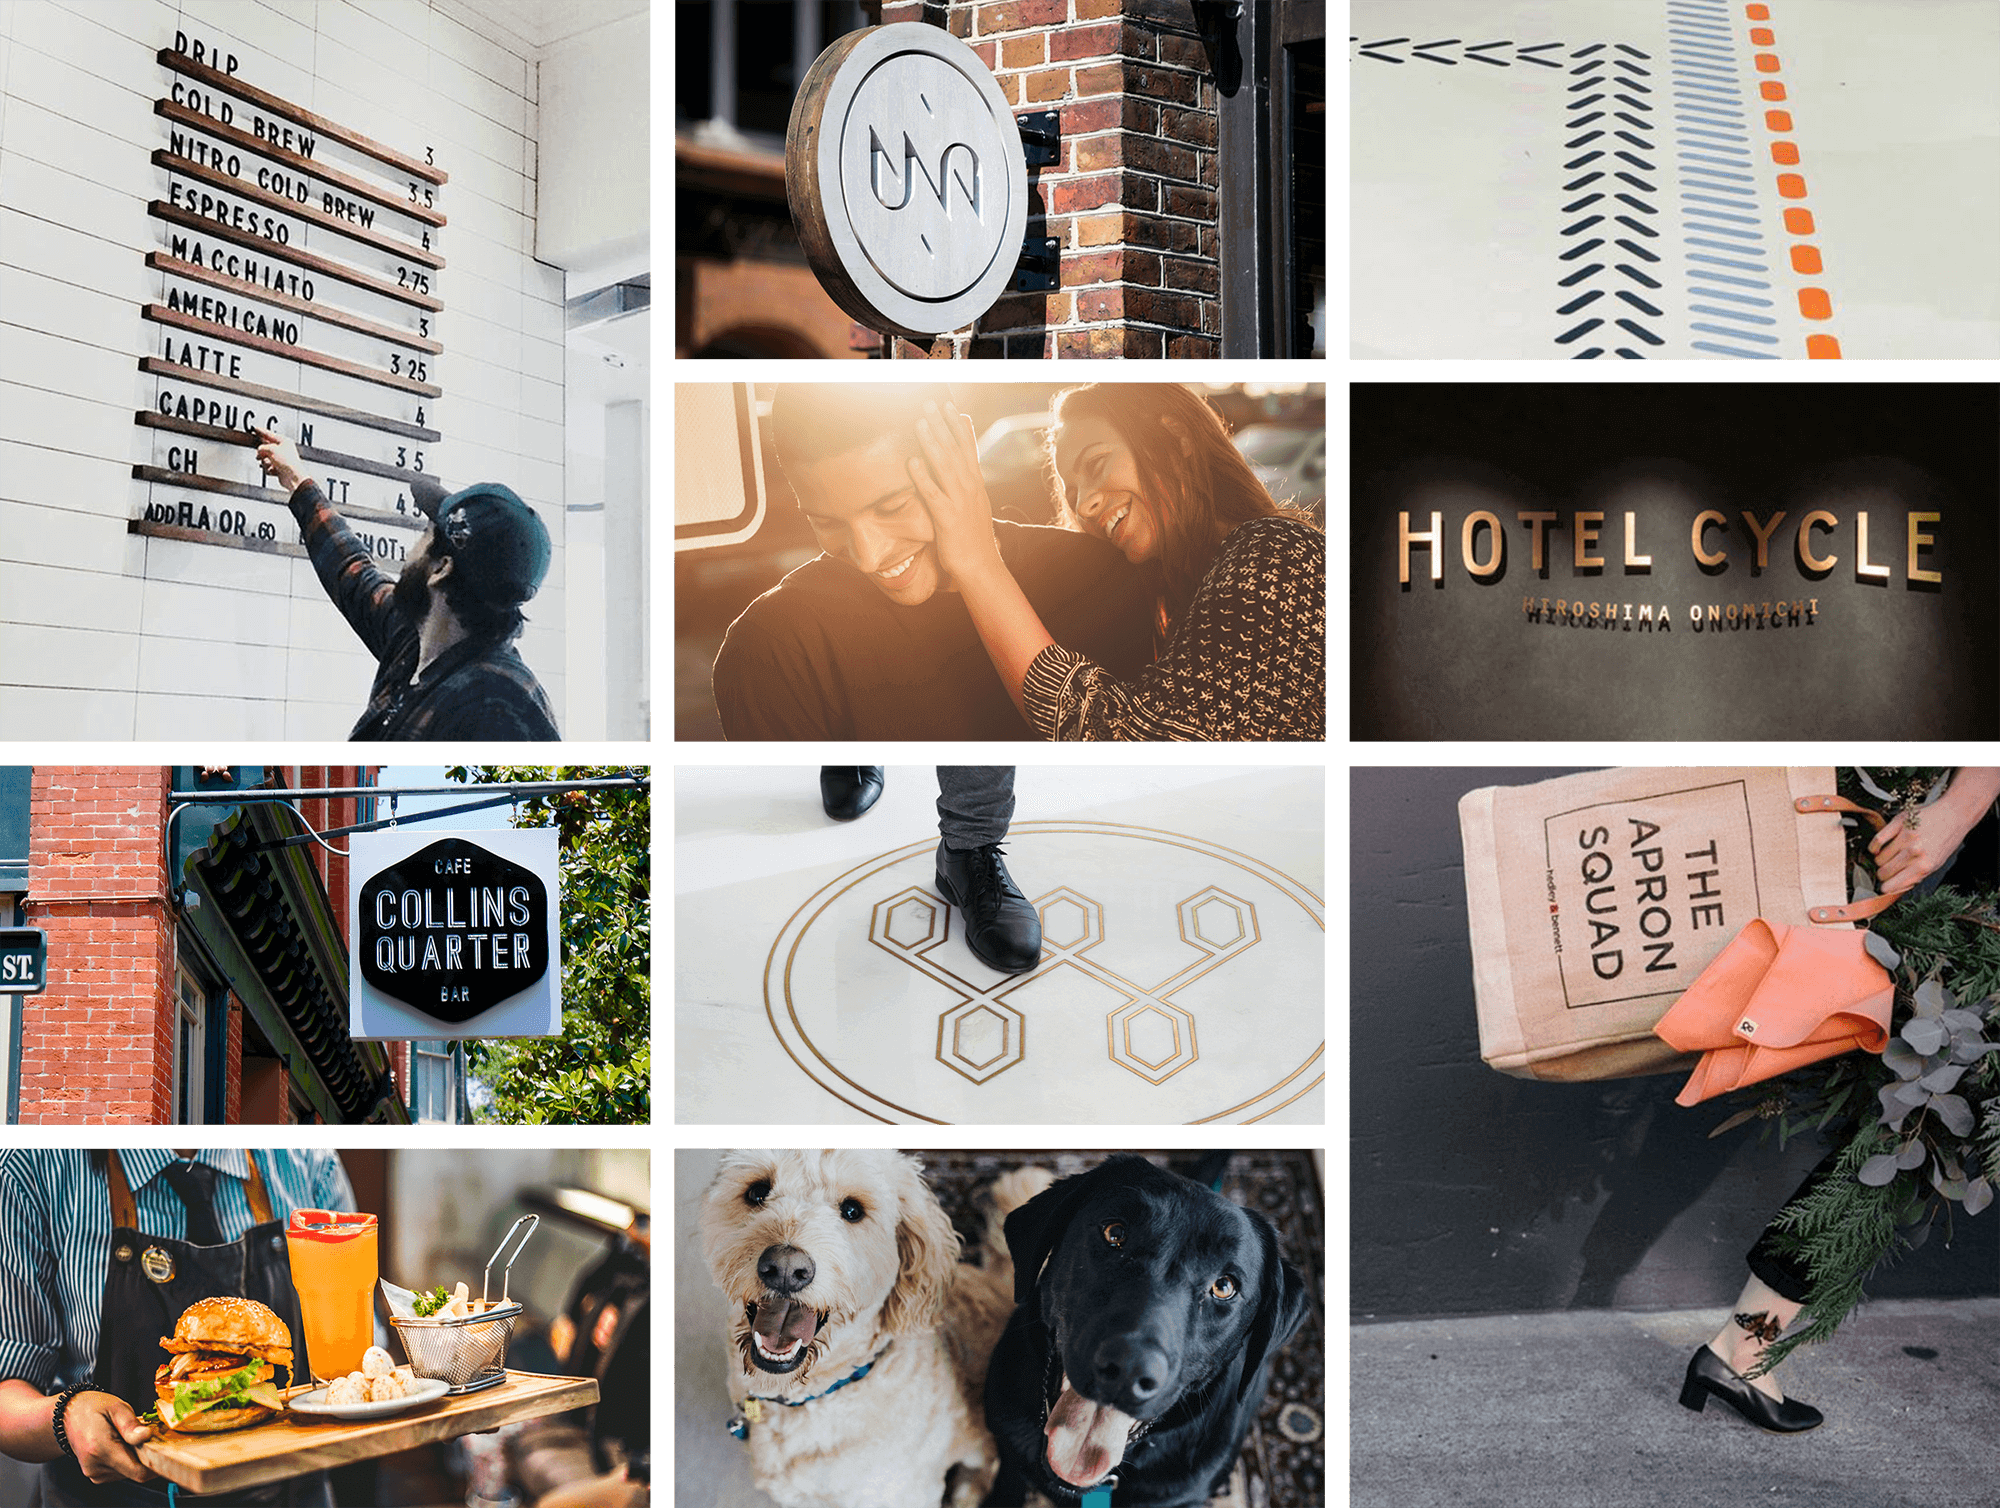 moodboard images including signage, dogs, tote bag, colored floor tile, a restaurant waiter carrying a burger and beer